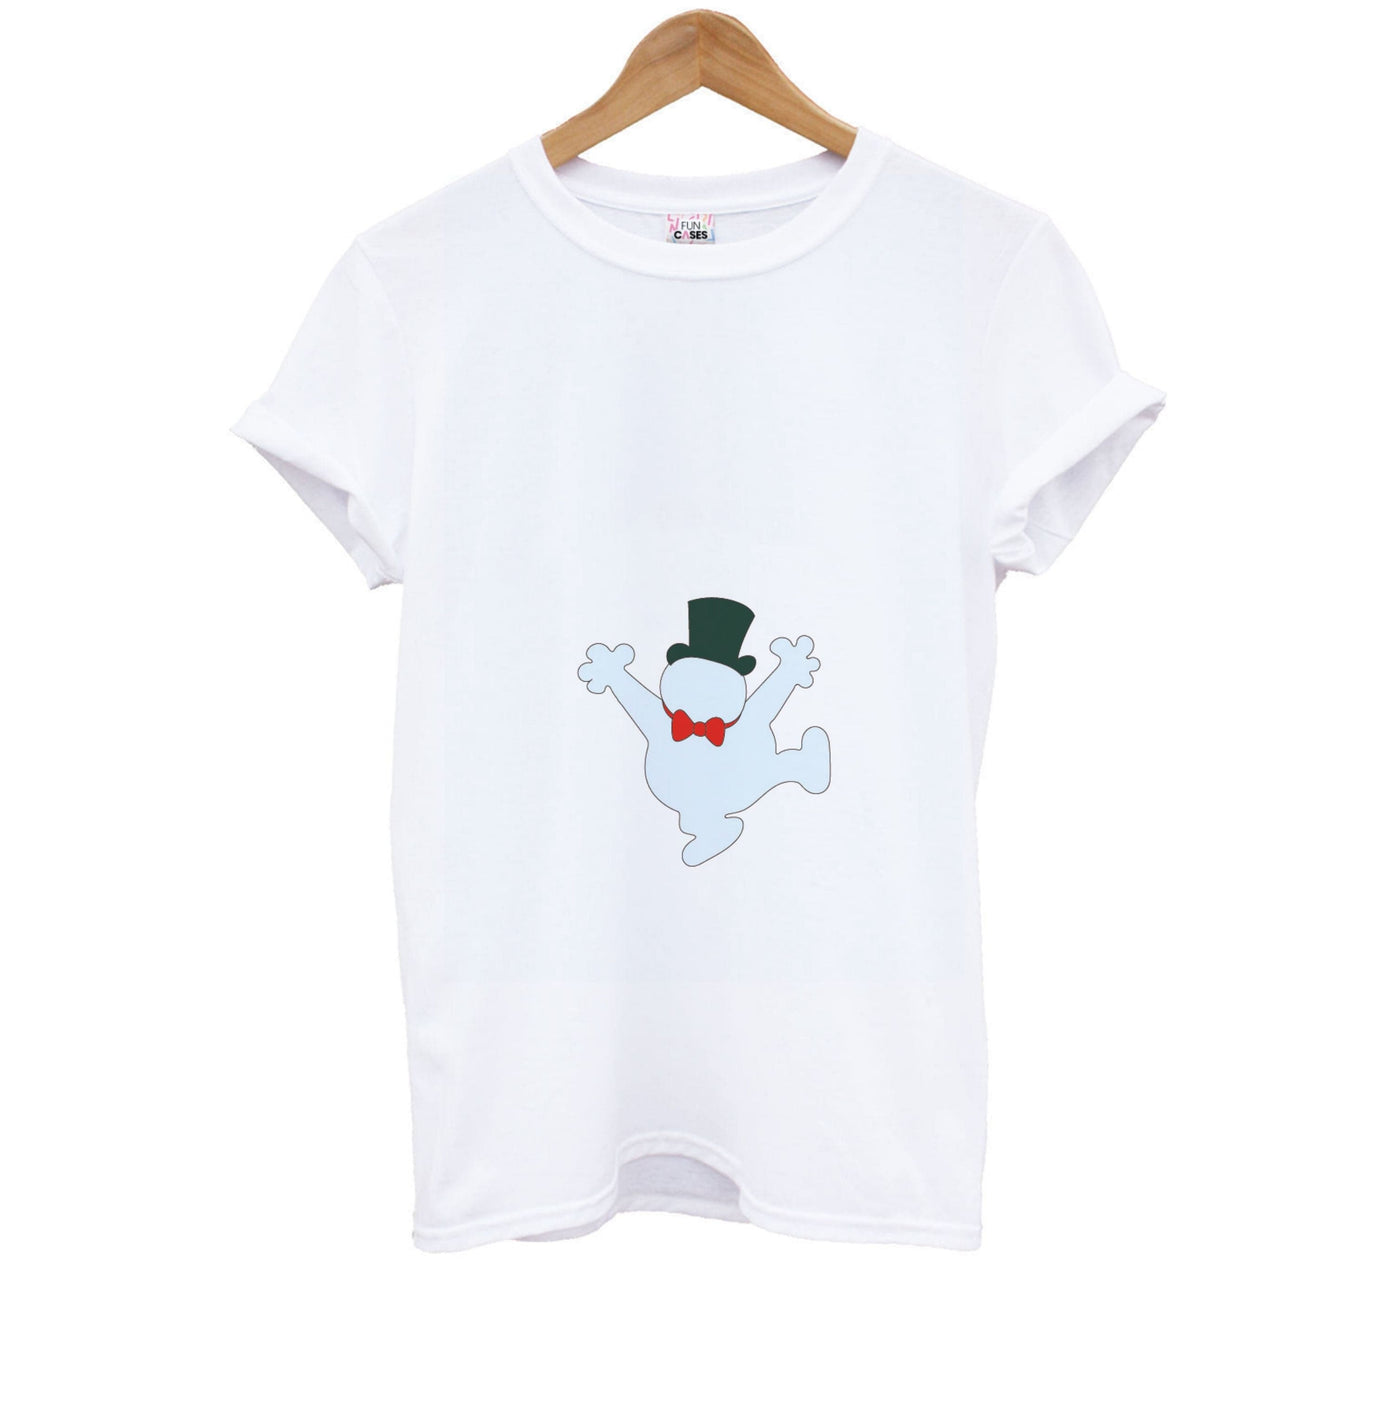 Outline - Frosty The Snowman Kids T-Shirt